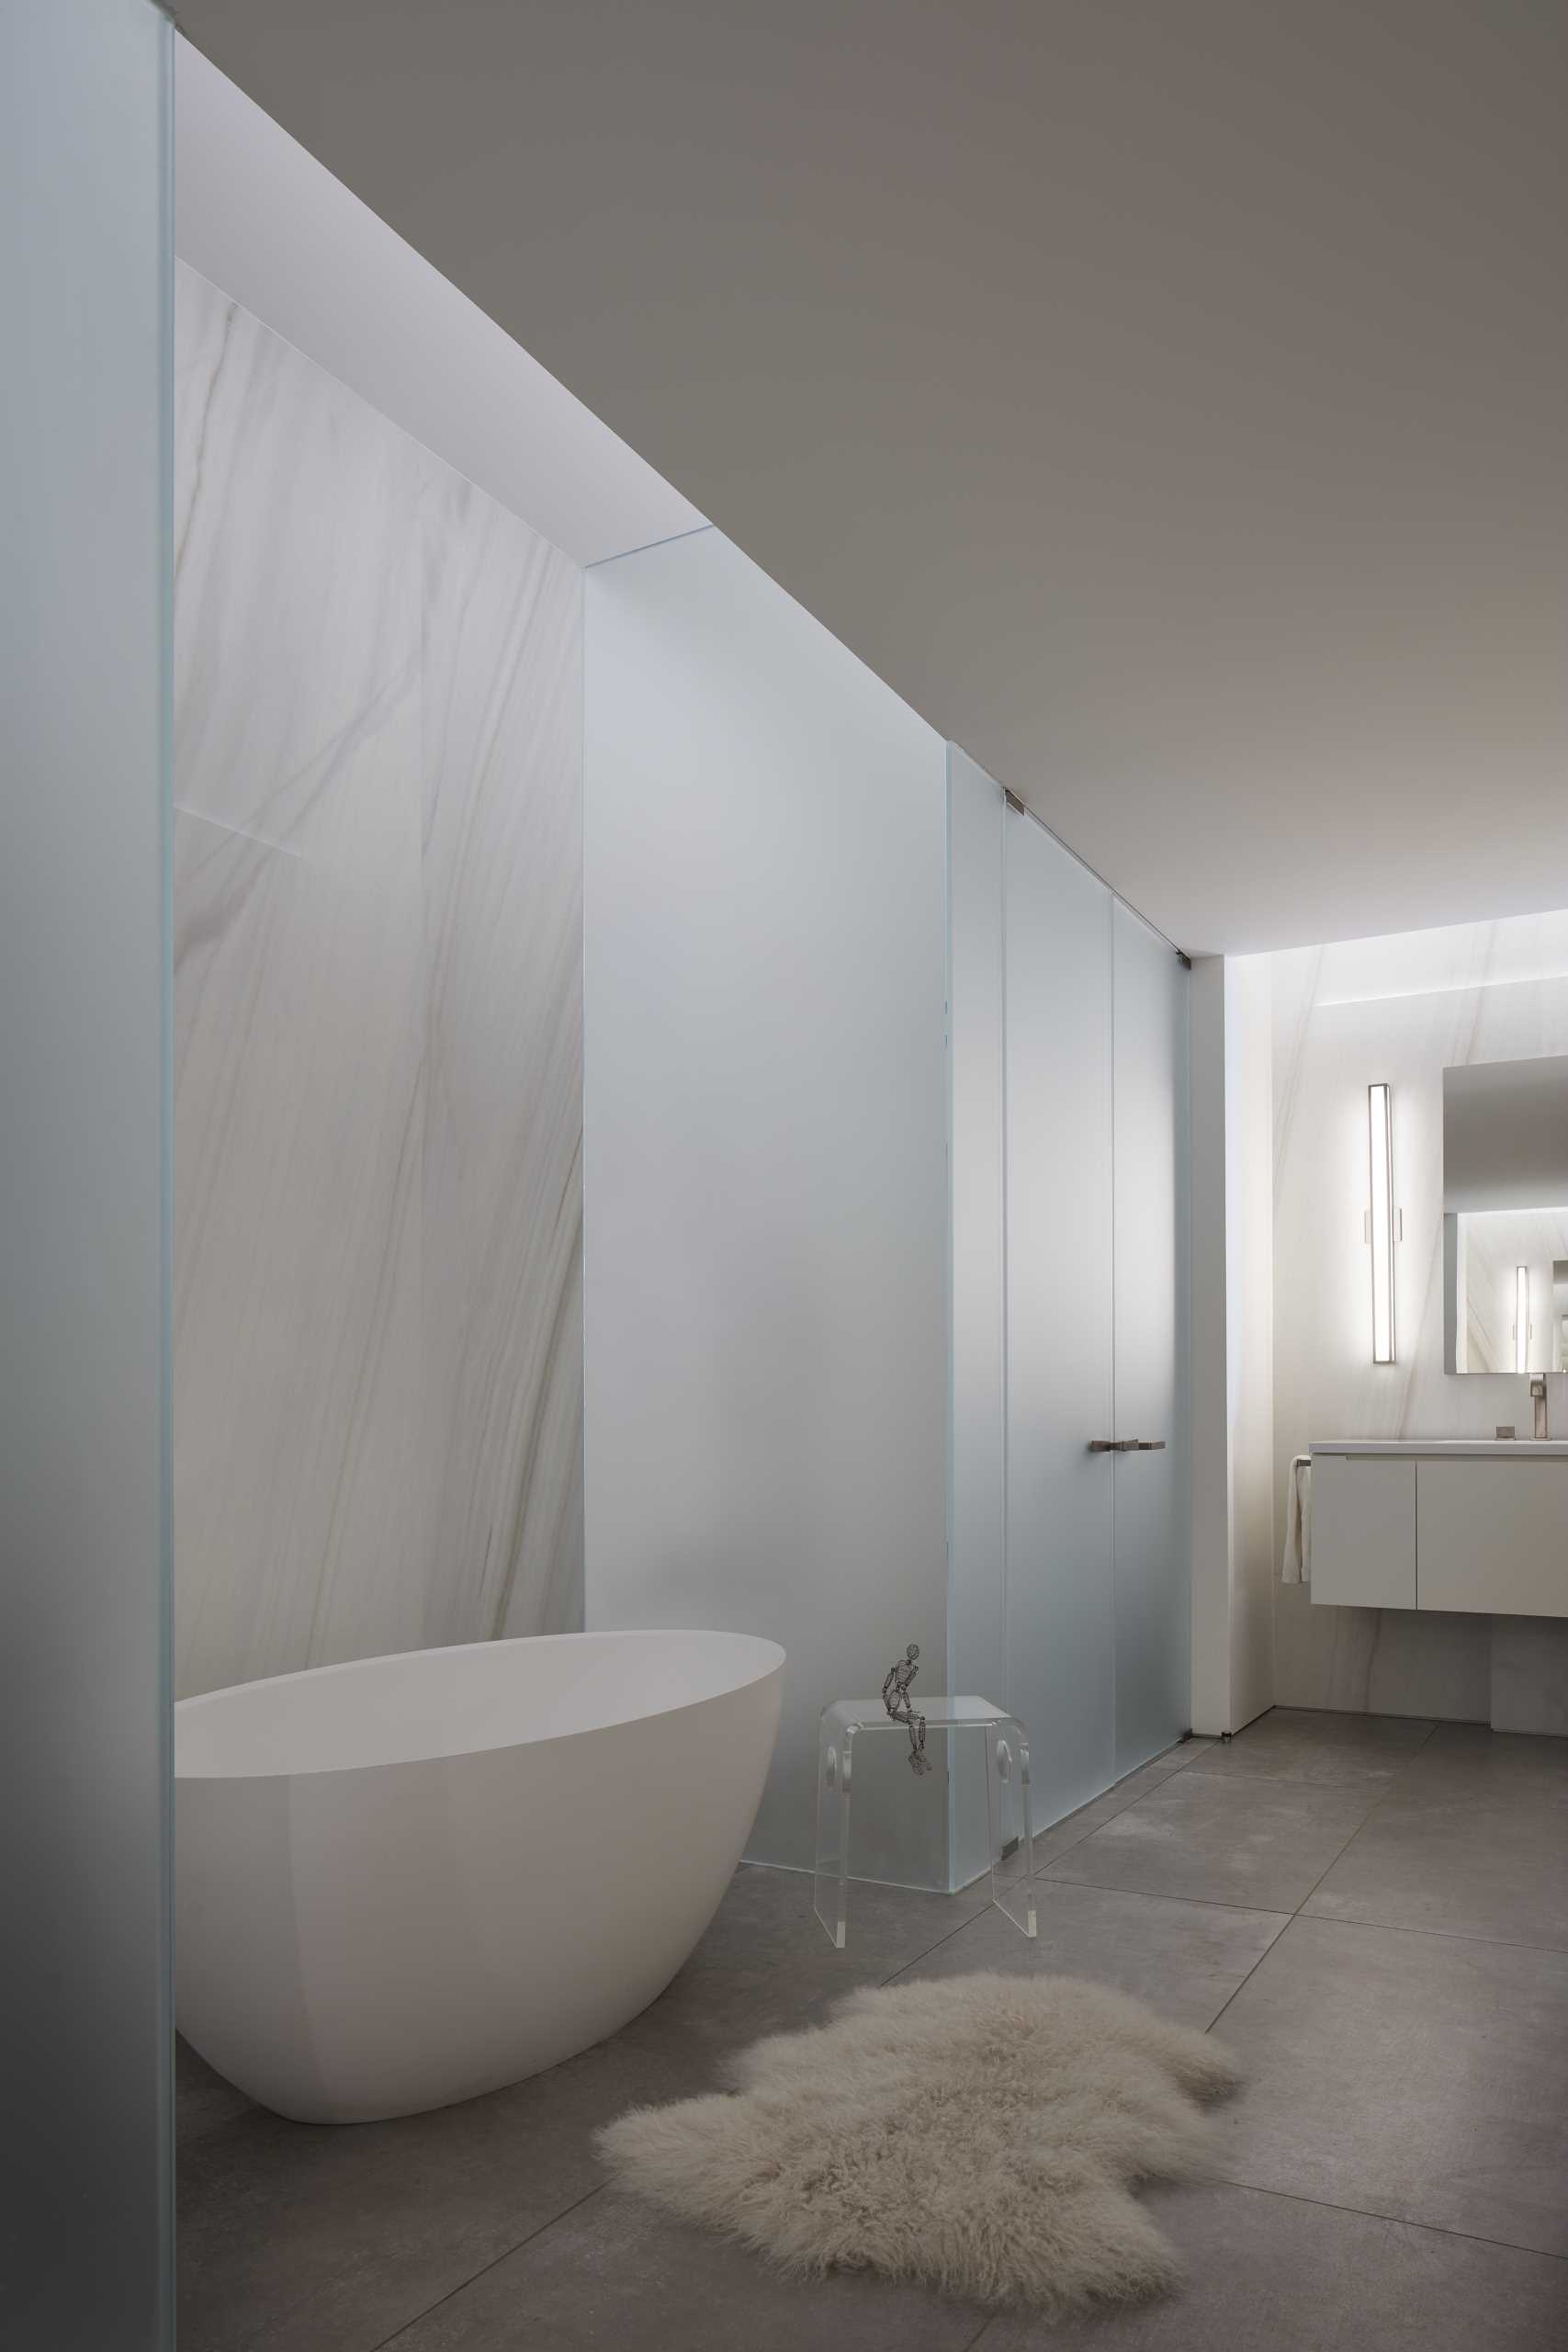 This bathroom has a freestanding bathtub, frosted glass walls, and a floating vanity.